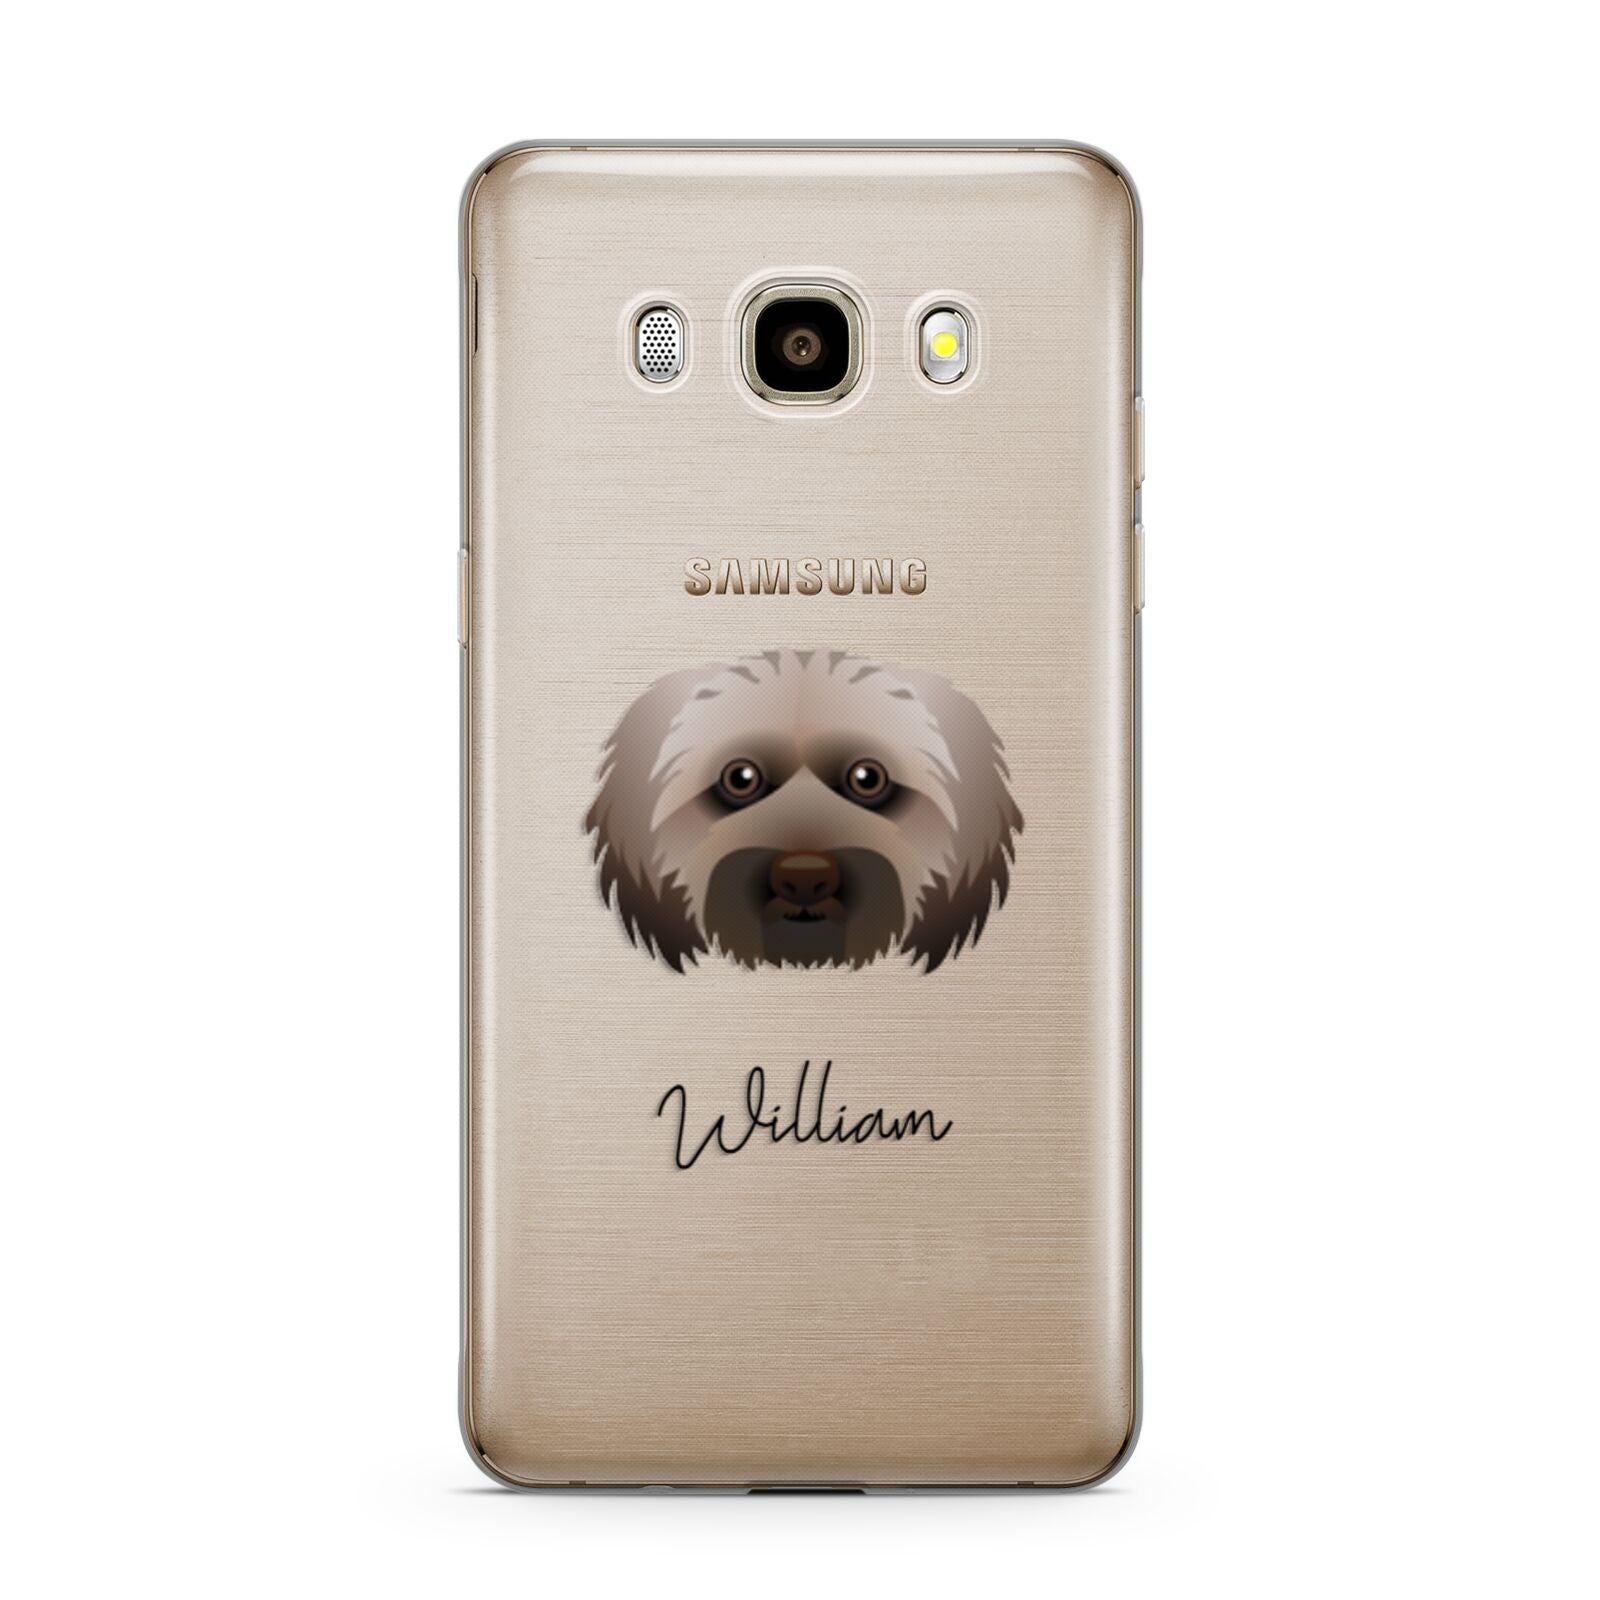 Doxiepoo Personalised Samsung Galaxy J7 2016 Case on gold phone